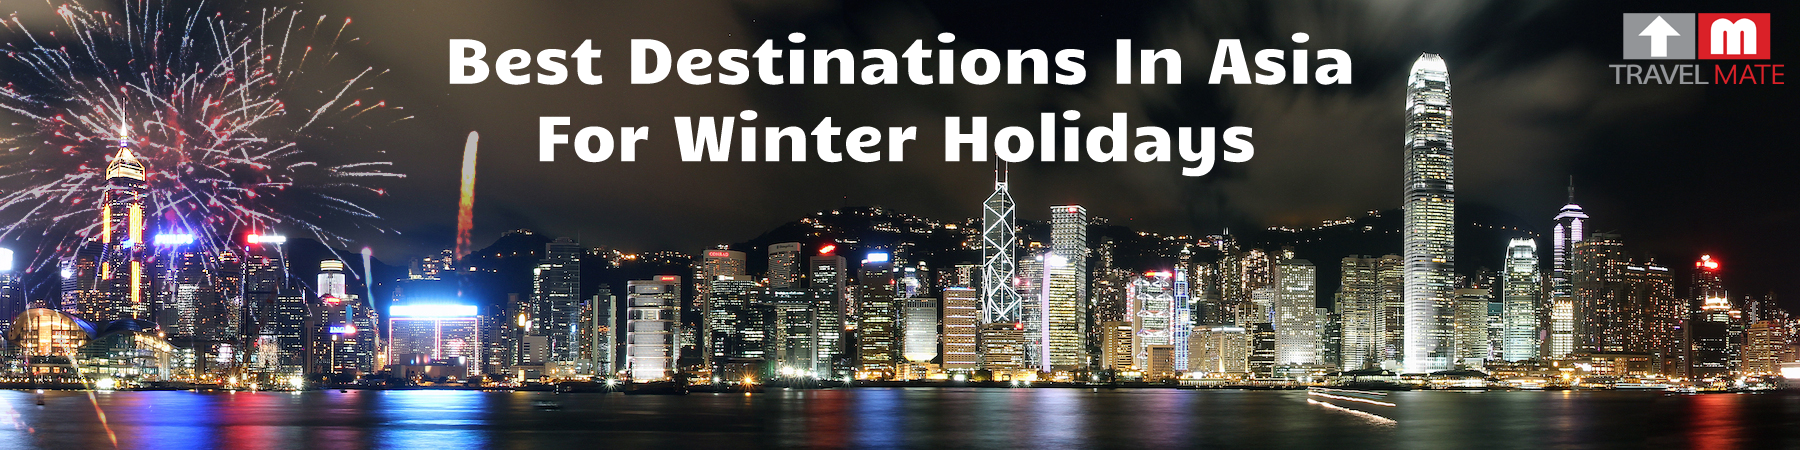 Best destinations in Asia For Winter Holidays